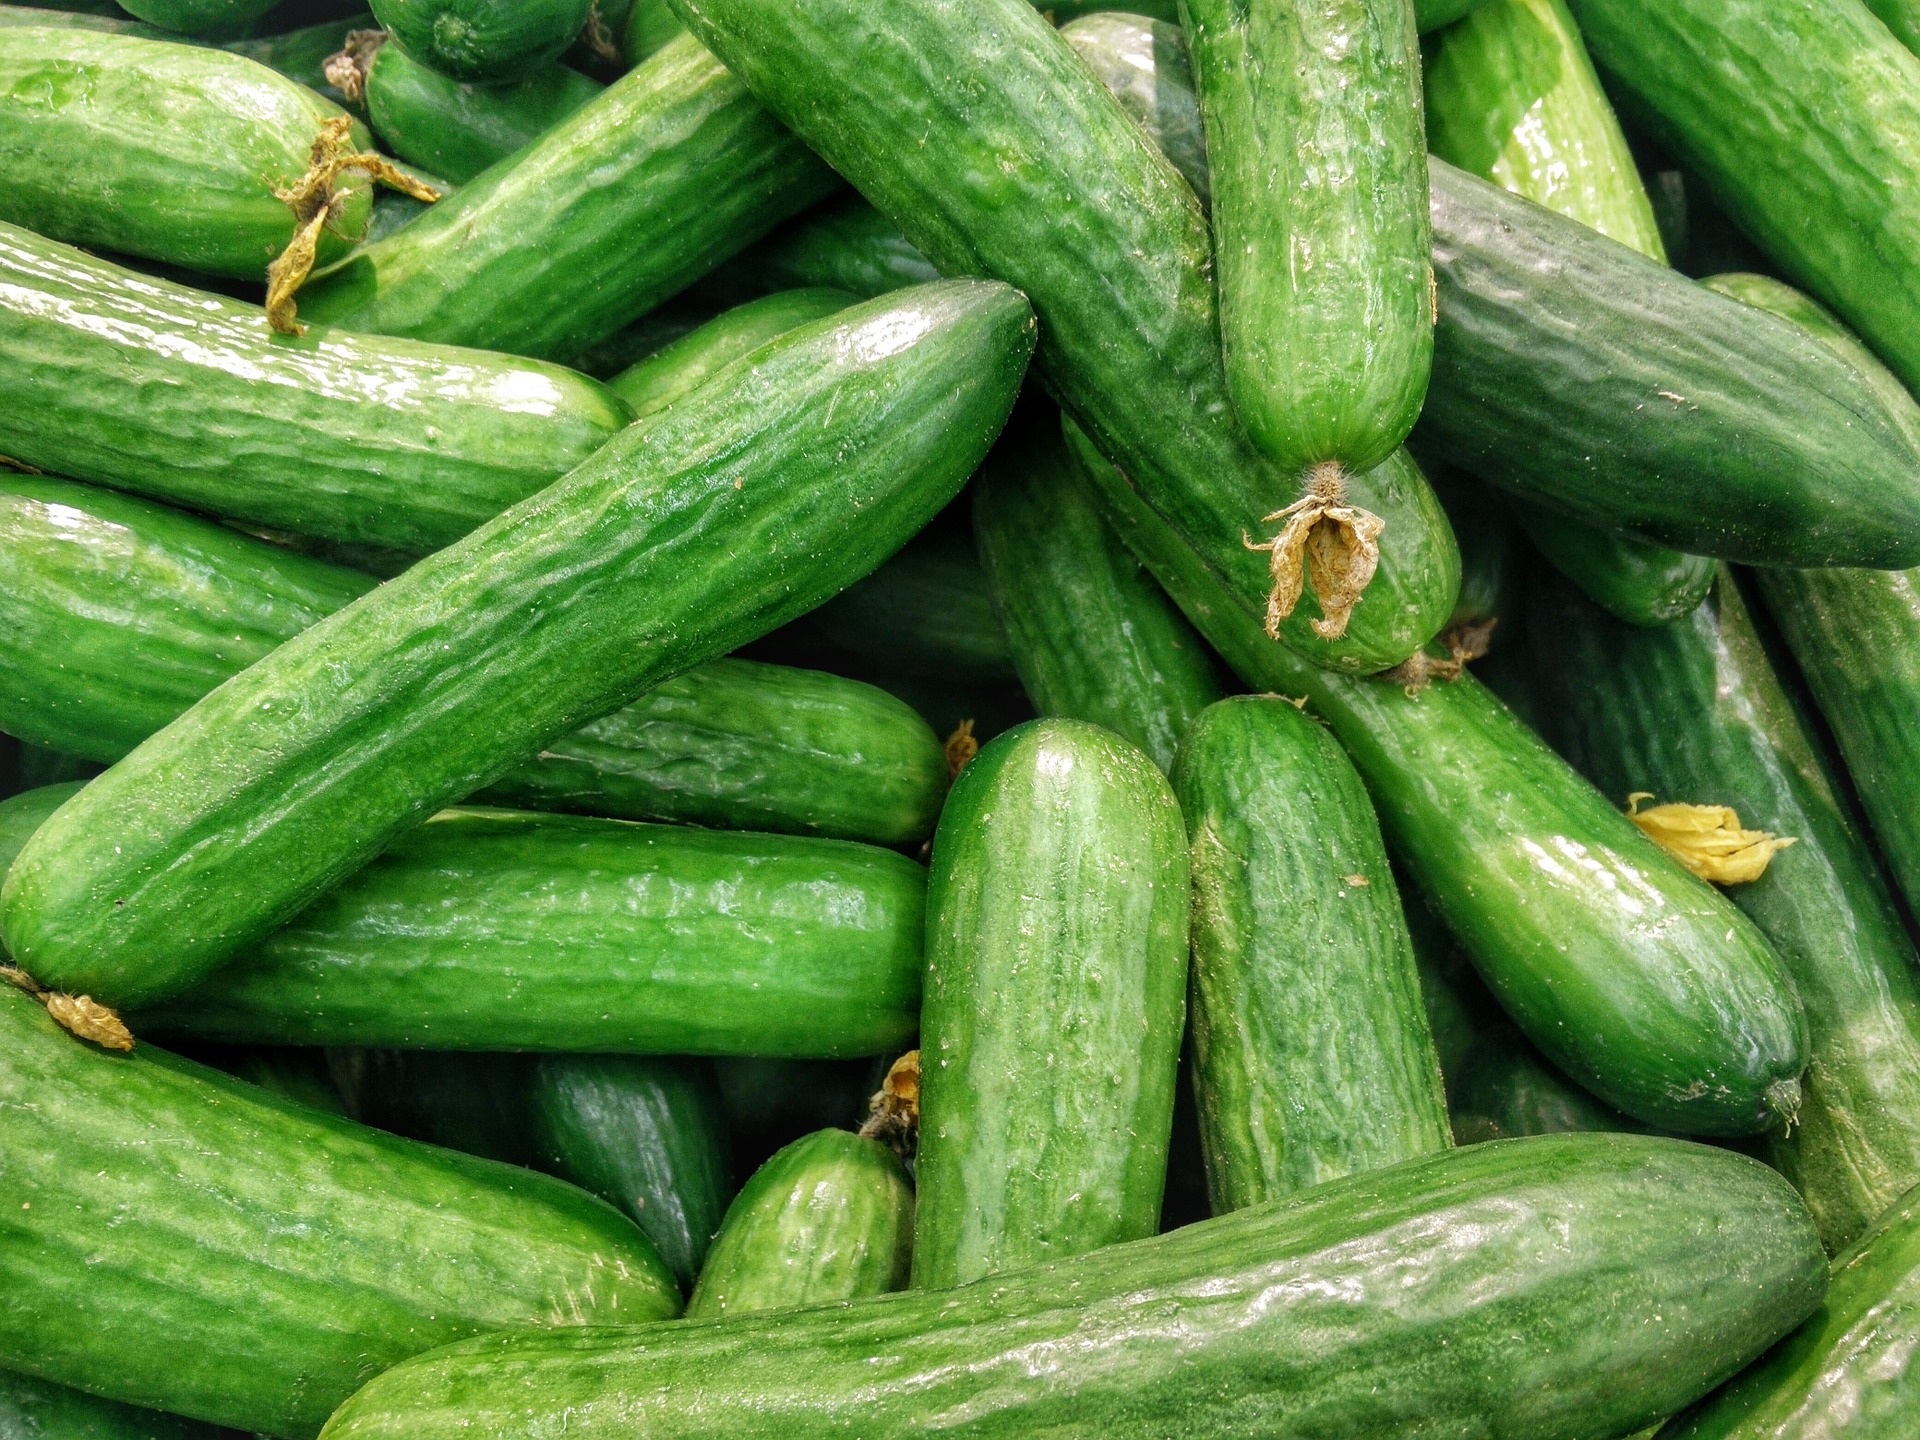 Cucumbers: Planting, Growing, and Harvesting Cucumbers | The Old ...